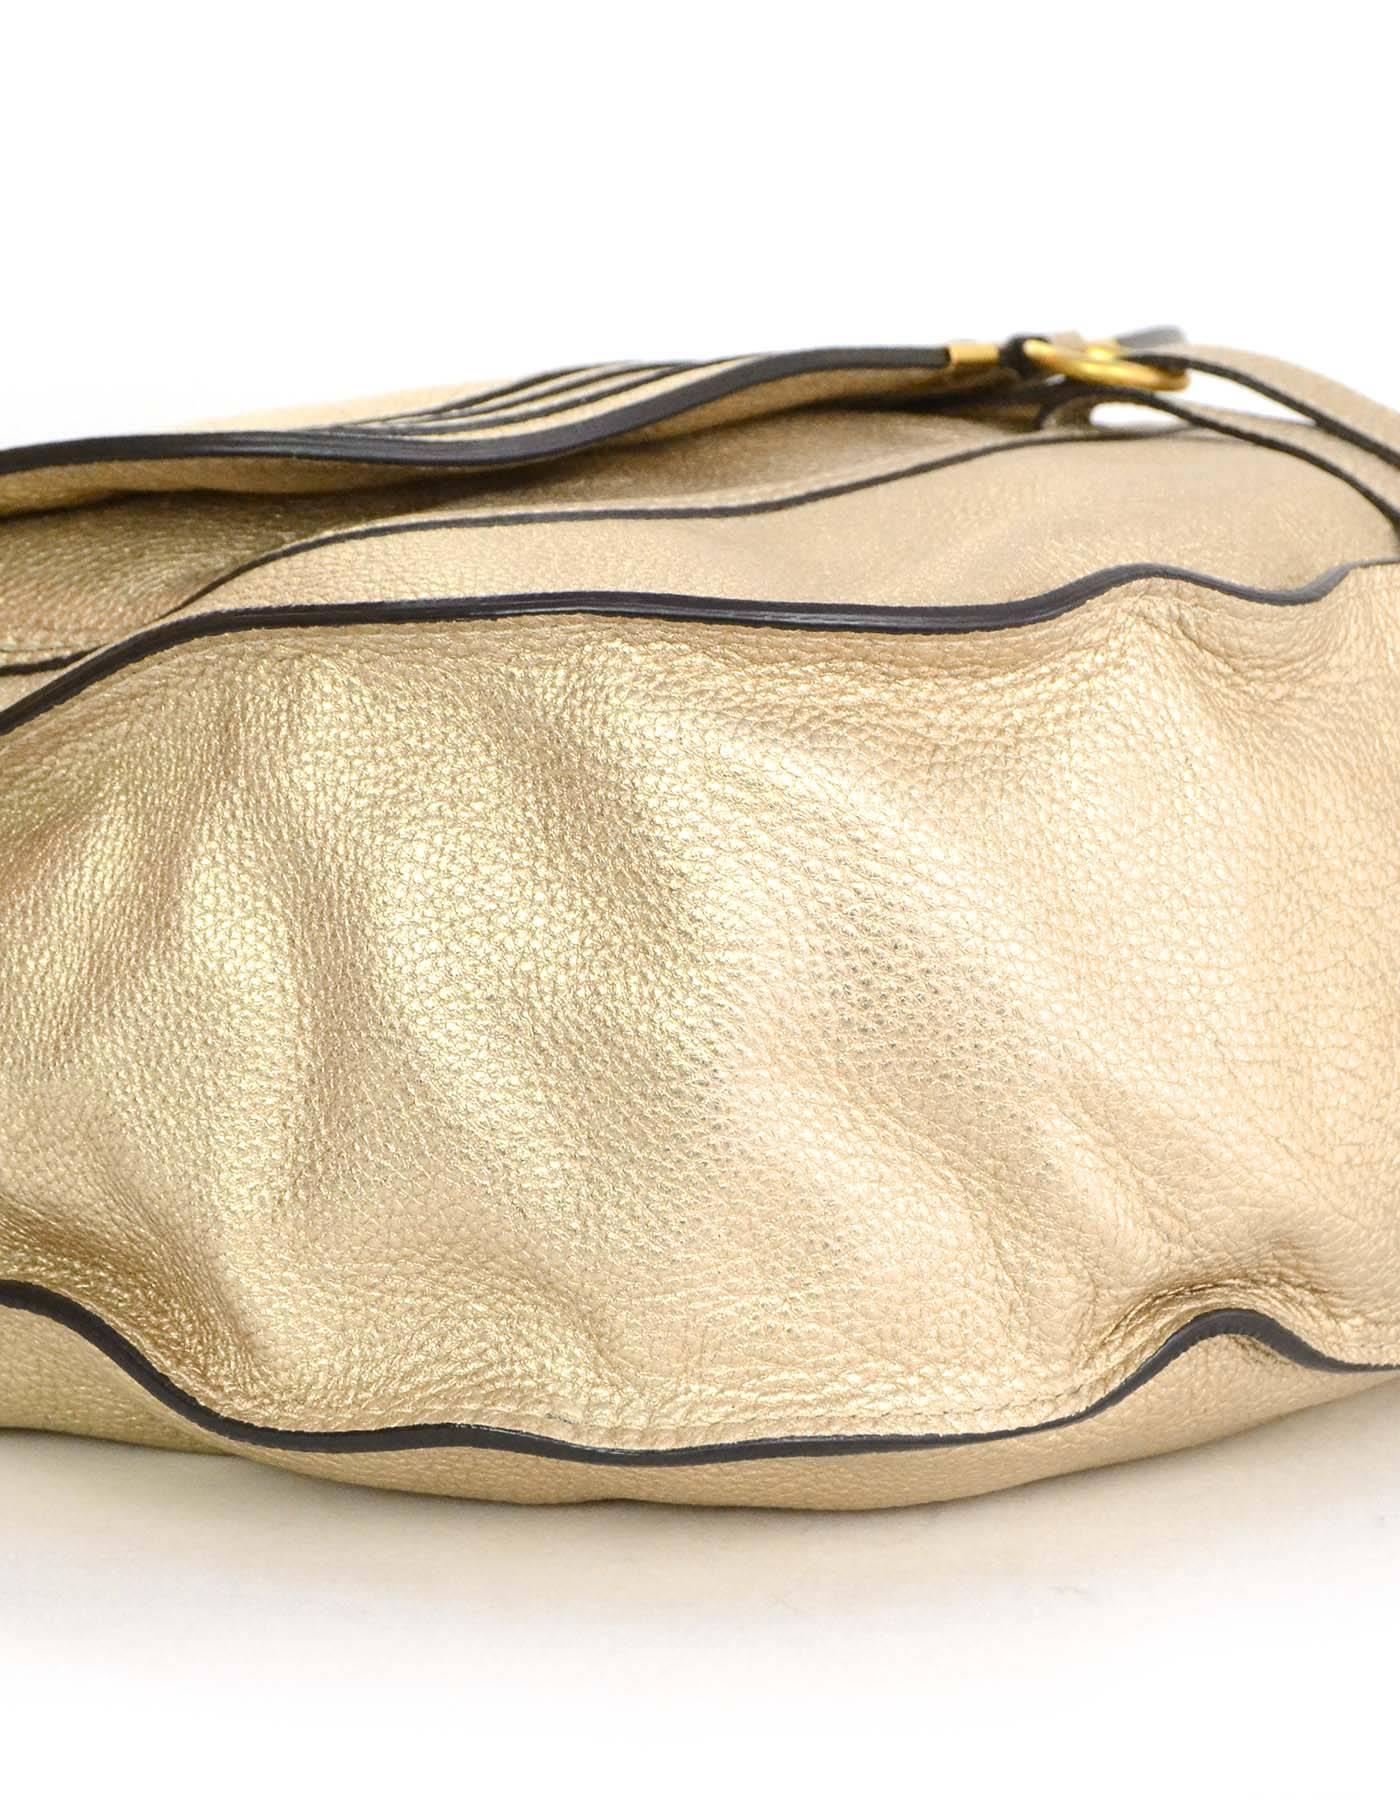 Chloe Gold Leather Large Marcie Hobo Bag with GHW 2